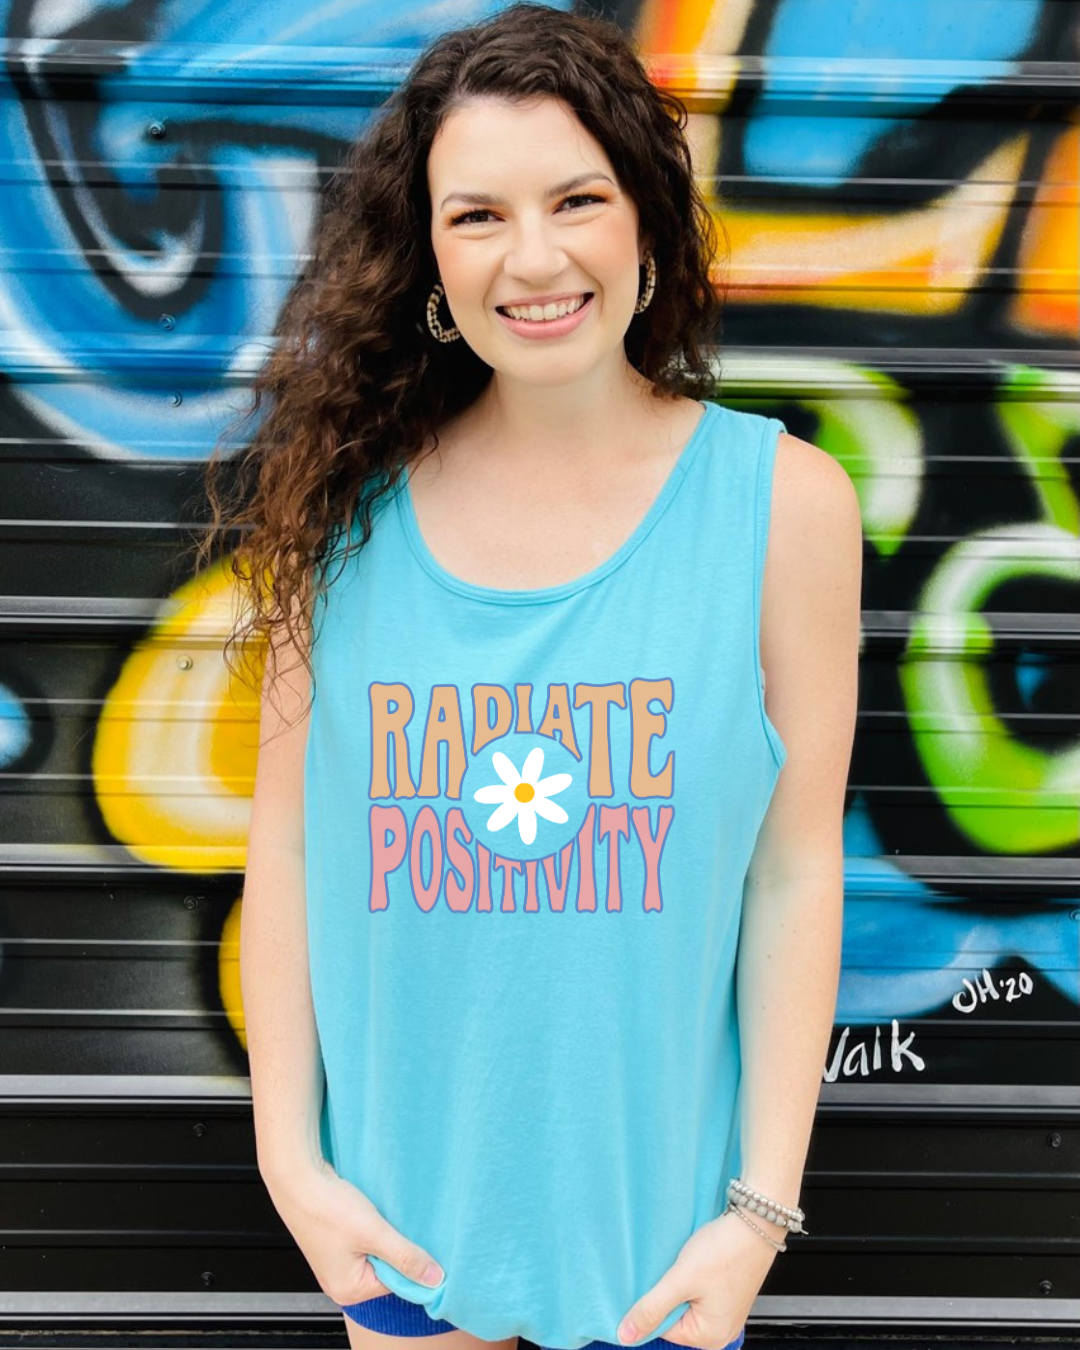 This Radiate Positivity Graphic Tank from Comfort Colors is the perfect addition to your wardrobe. With its bright blue hue and vibrant daisy design, it'll let you show off your cheerful personality. Put it on and spread those good vibes!